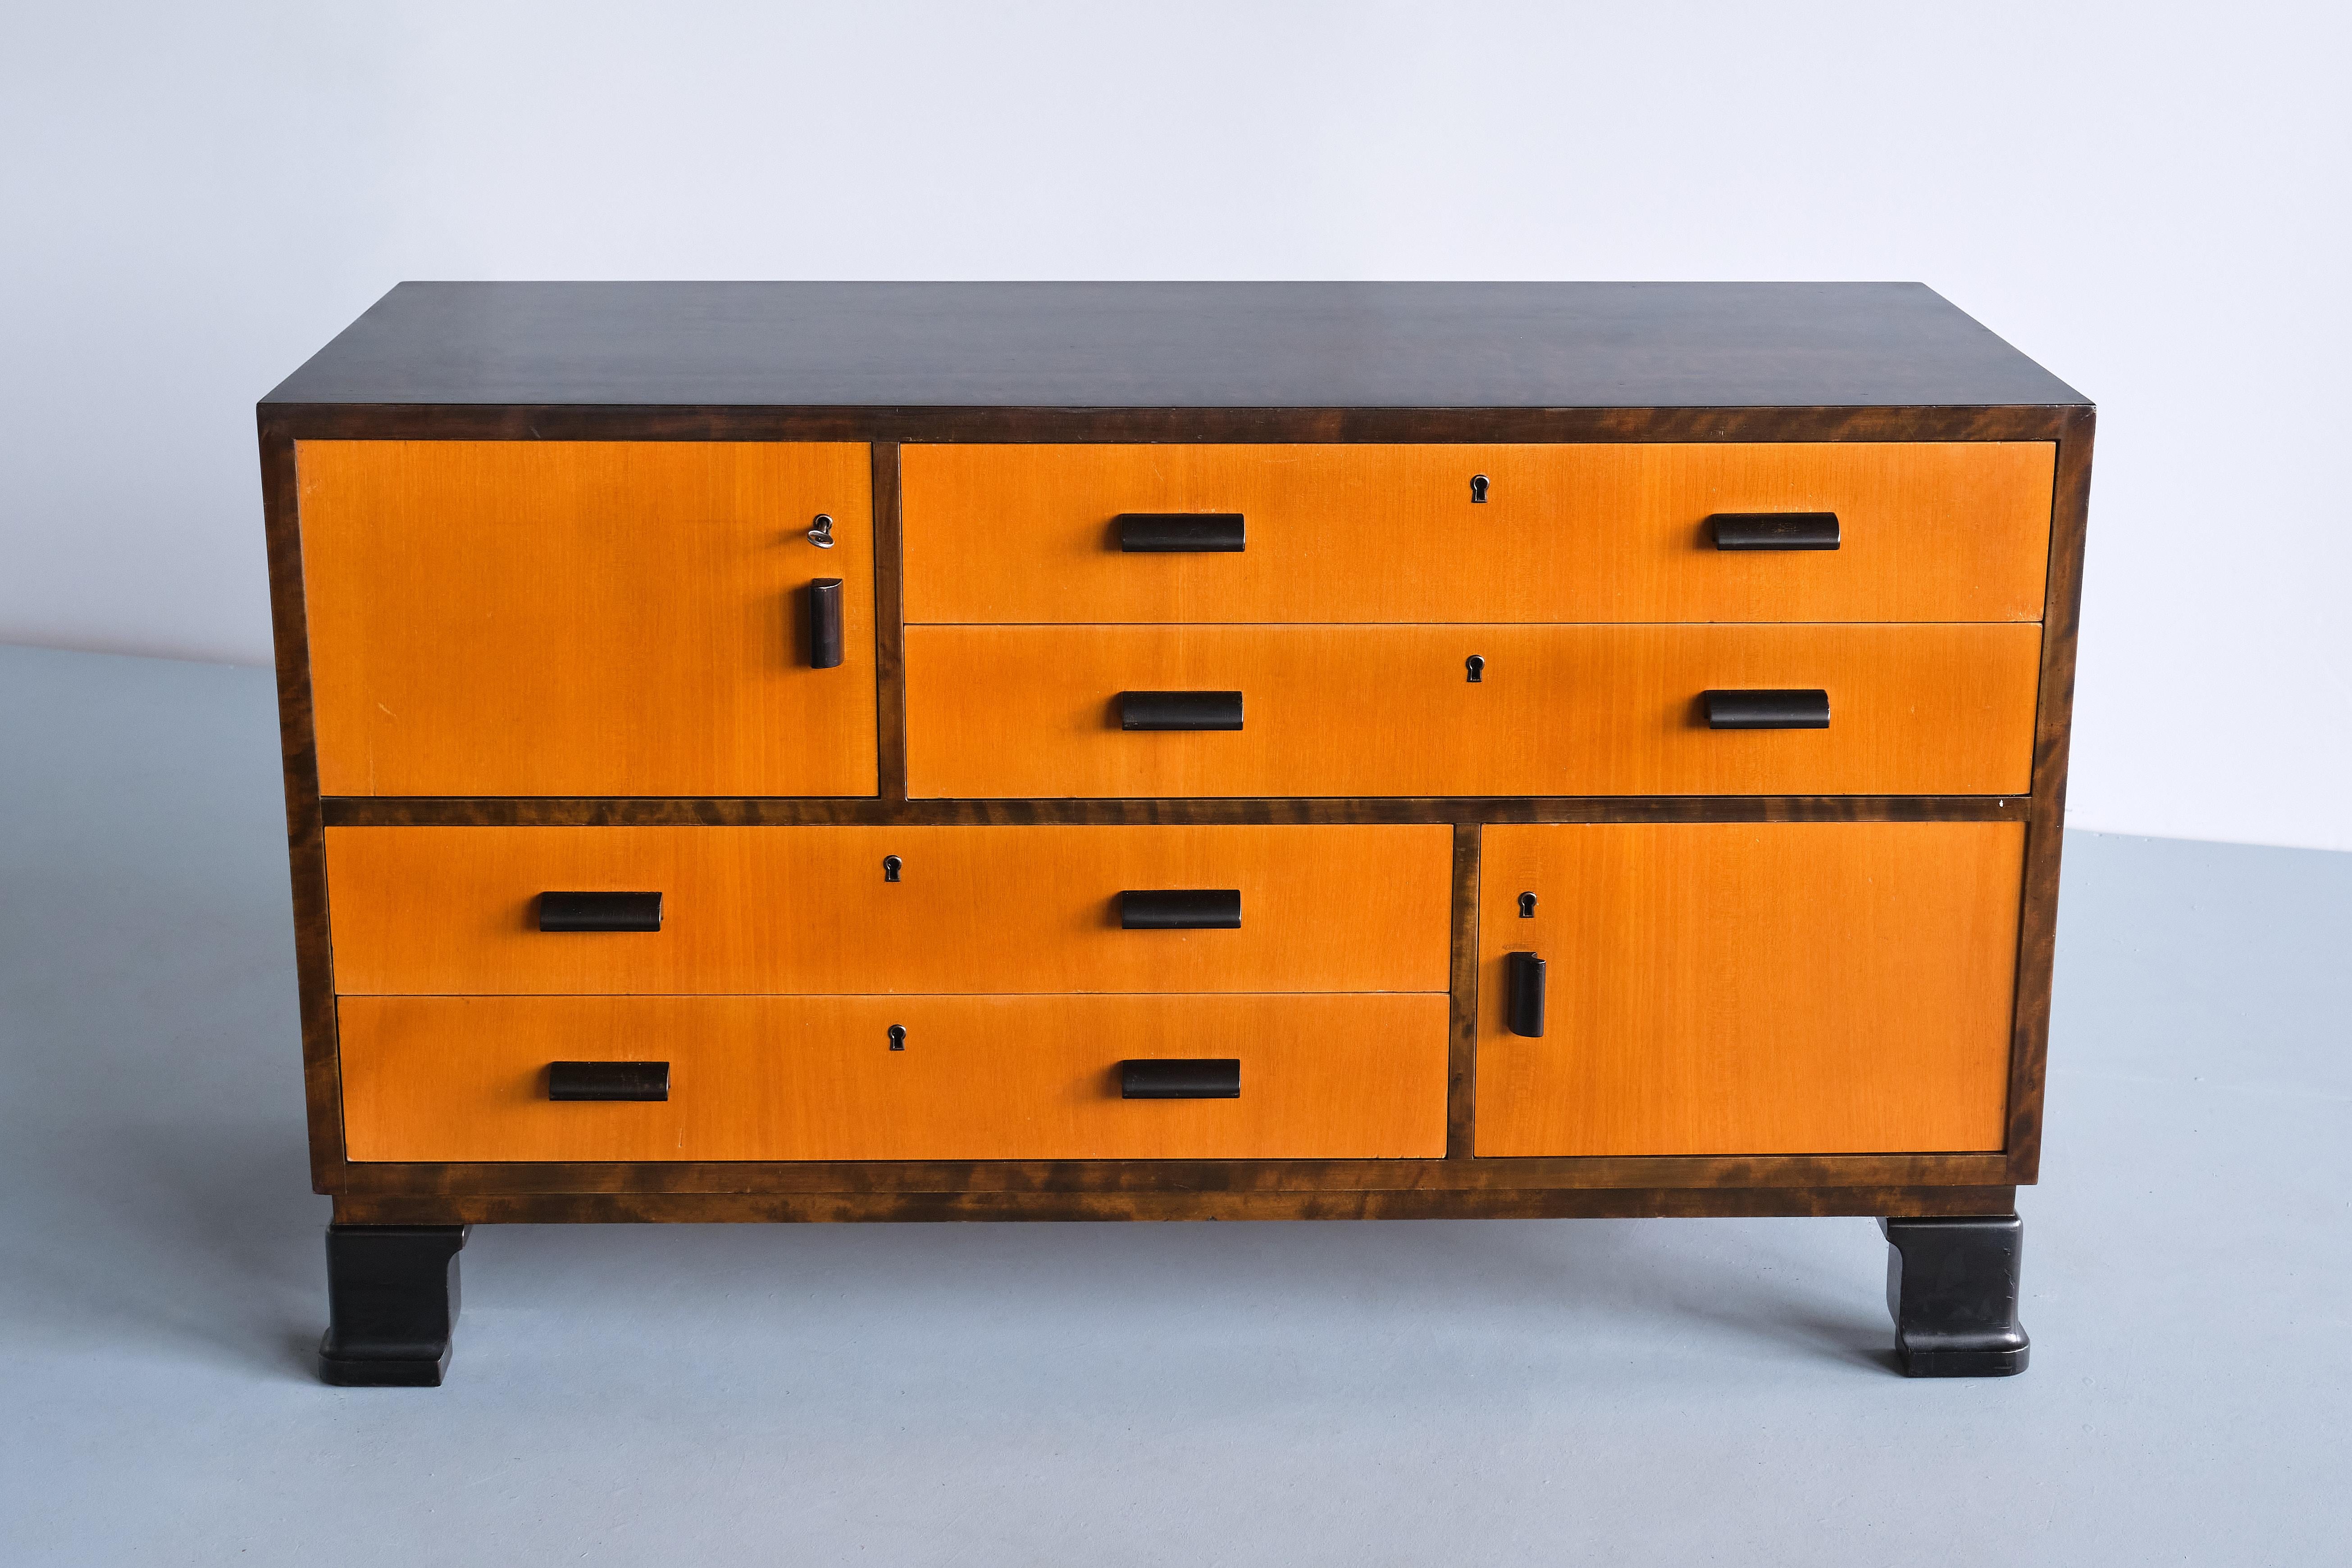 Scandinavian Modern Pair of Axel Larsson Sideboards in Elm and Birch, SMF Bodafors, Sweden, 1940s For Sale